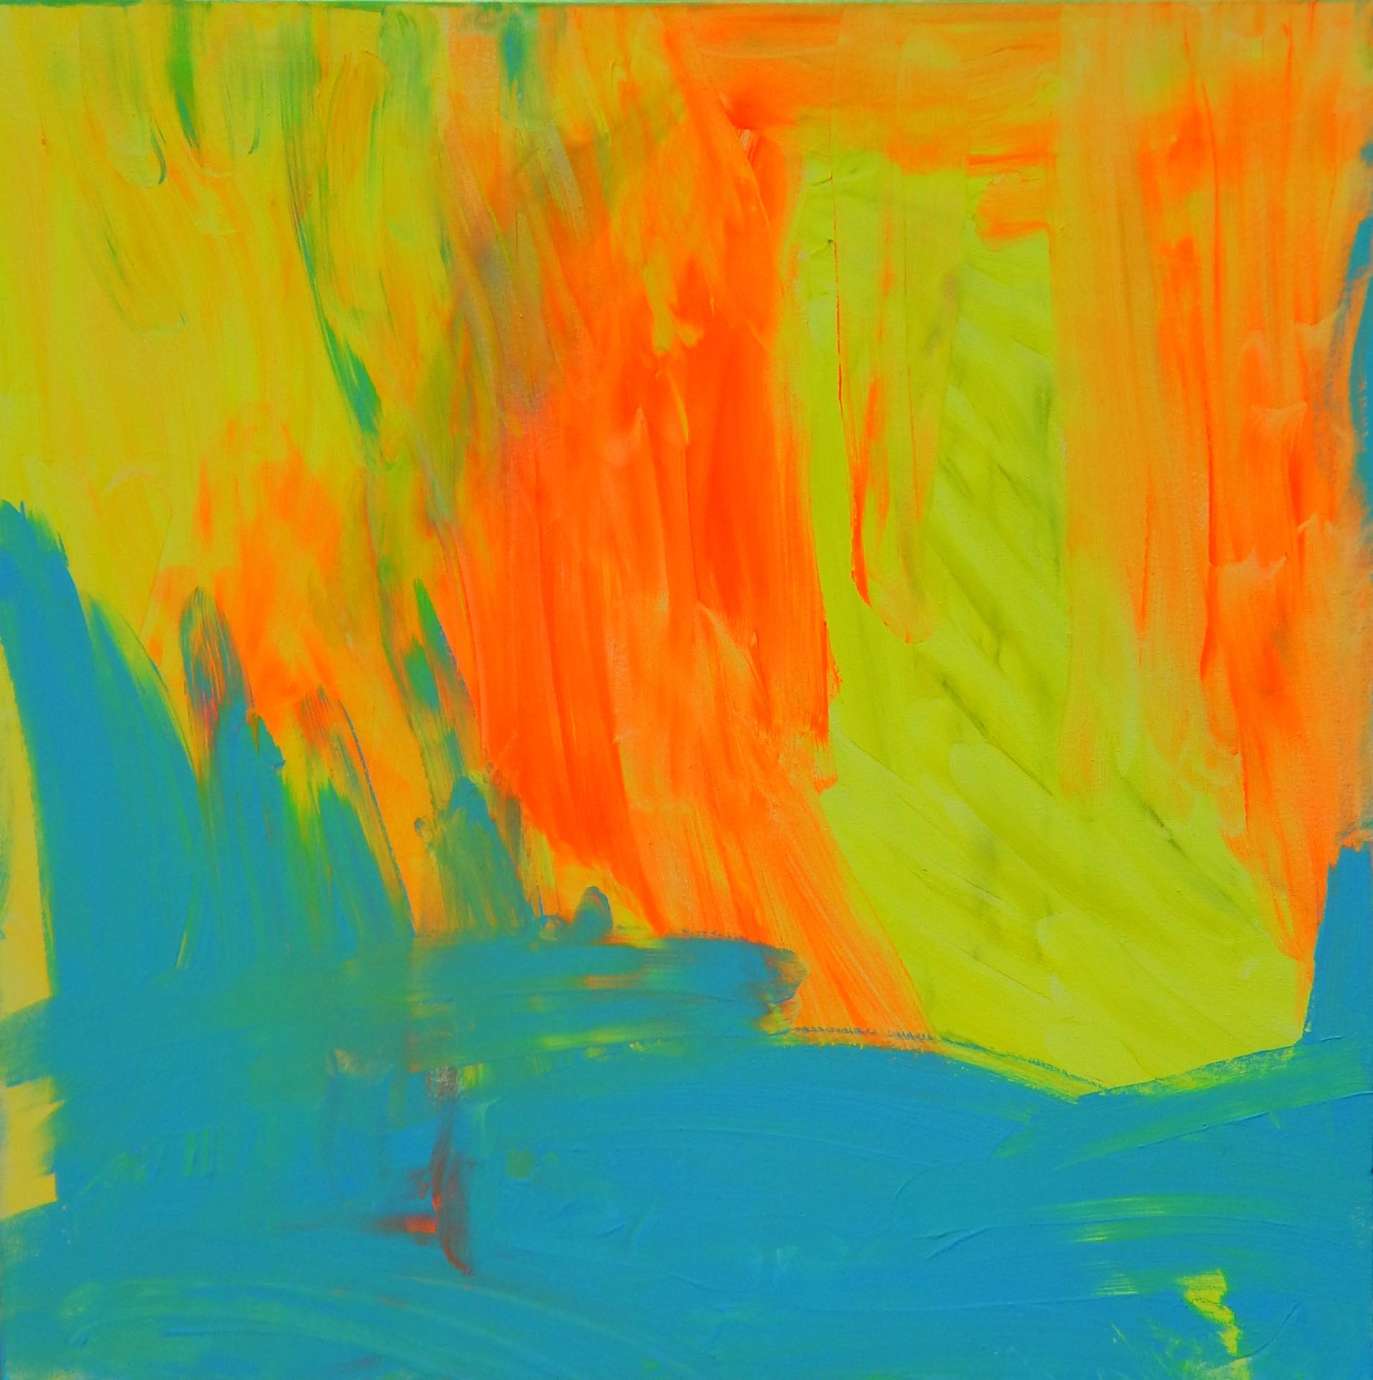 An abstract painting by Wiley Johnson featuring teal on the bottom and bright neon yellow and orange at the top